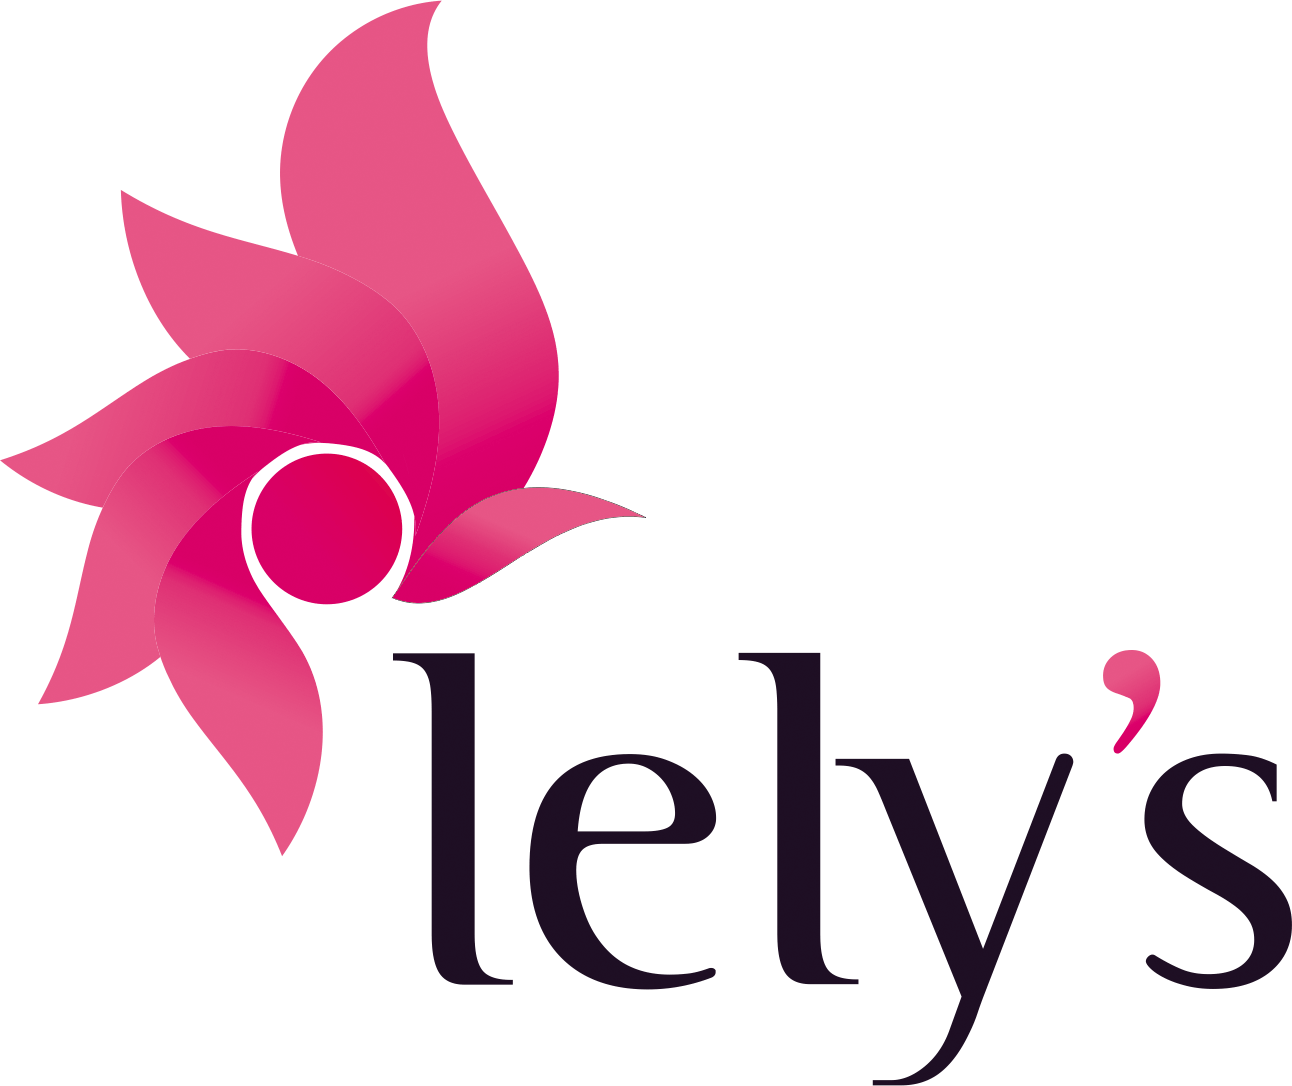 Lely Logo - Terms & Conditions – Lely's